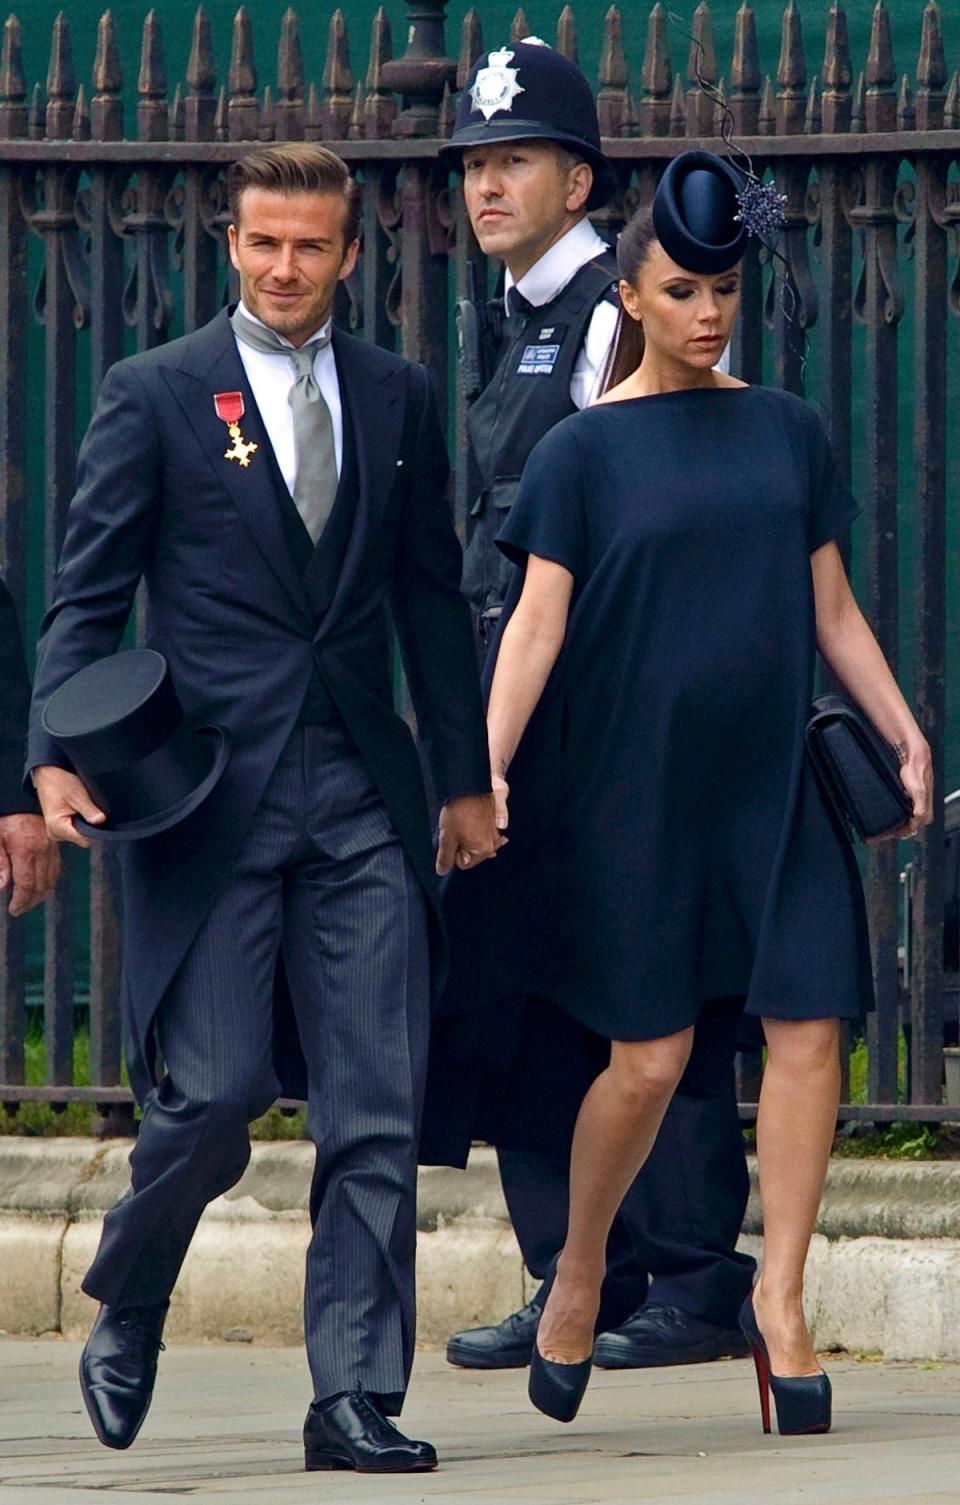 Coordinating navy looks were a sleek statement from the couple (REUTERS)